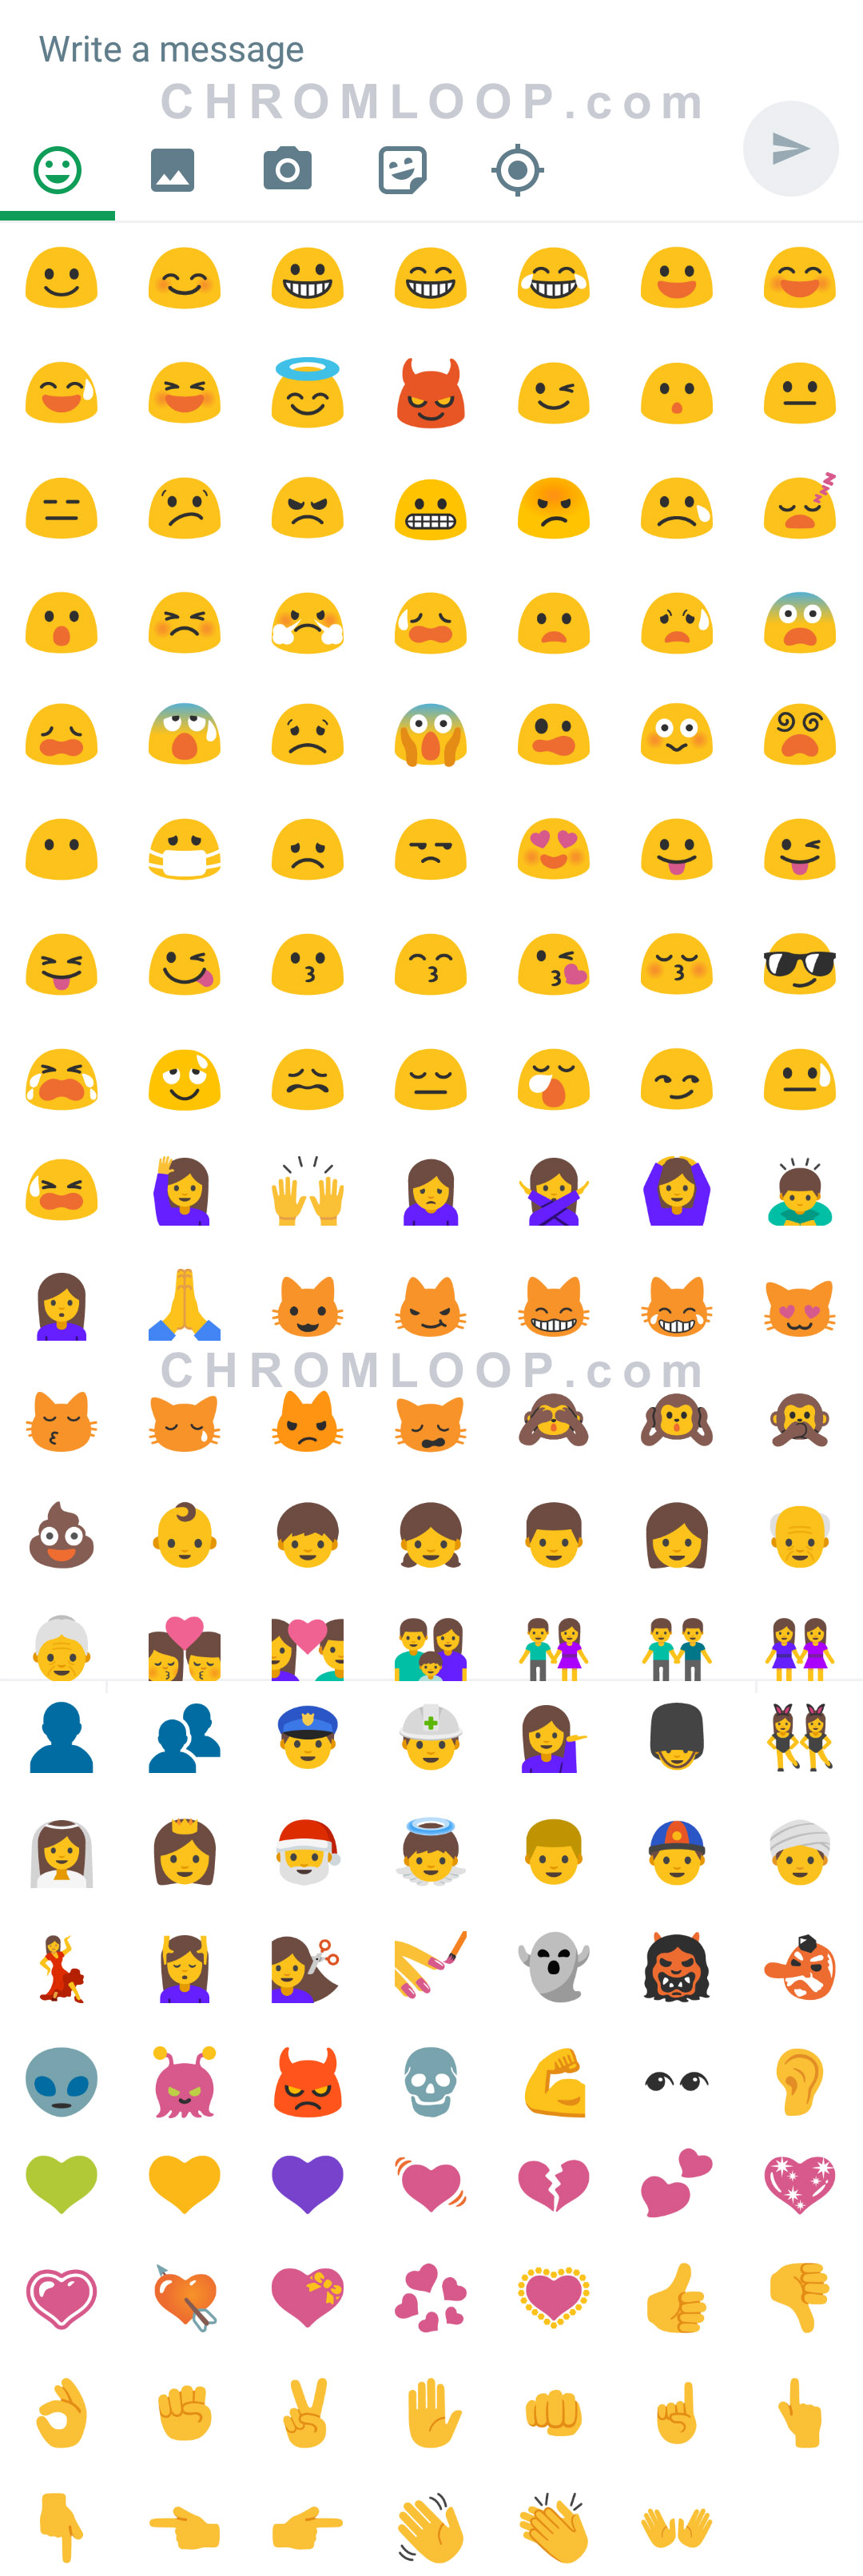 New emoji in Android N